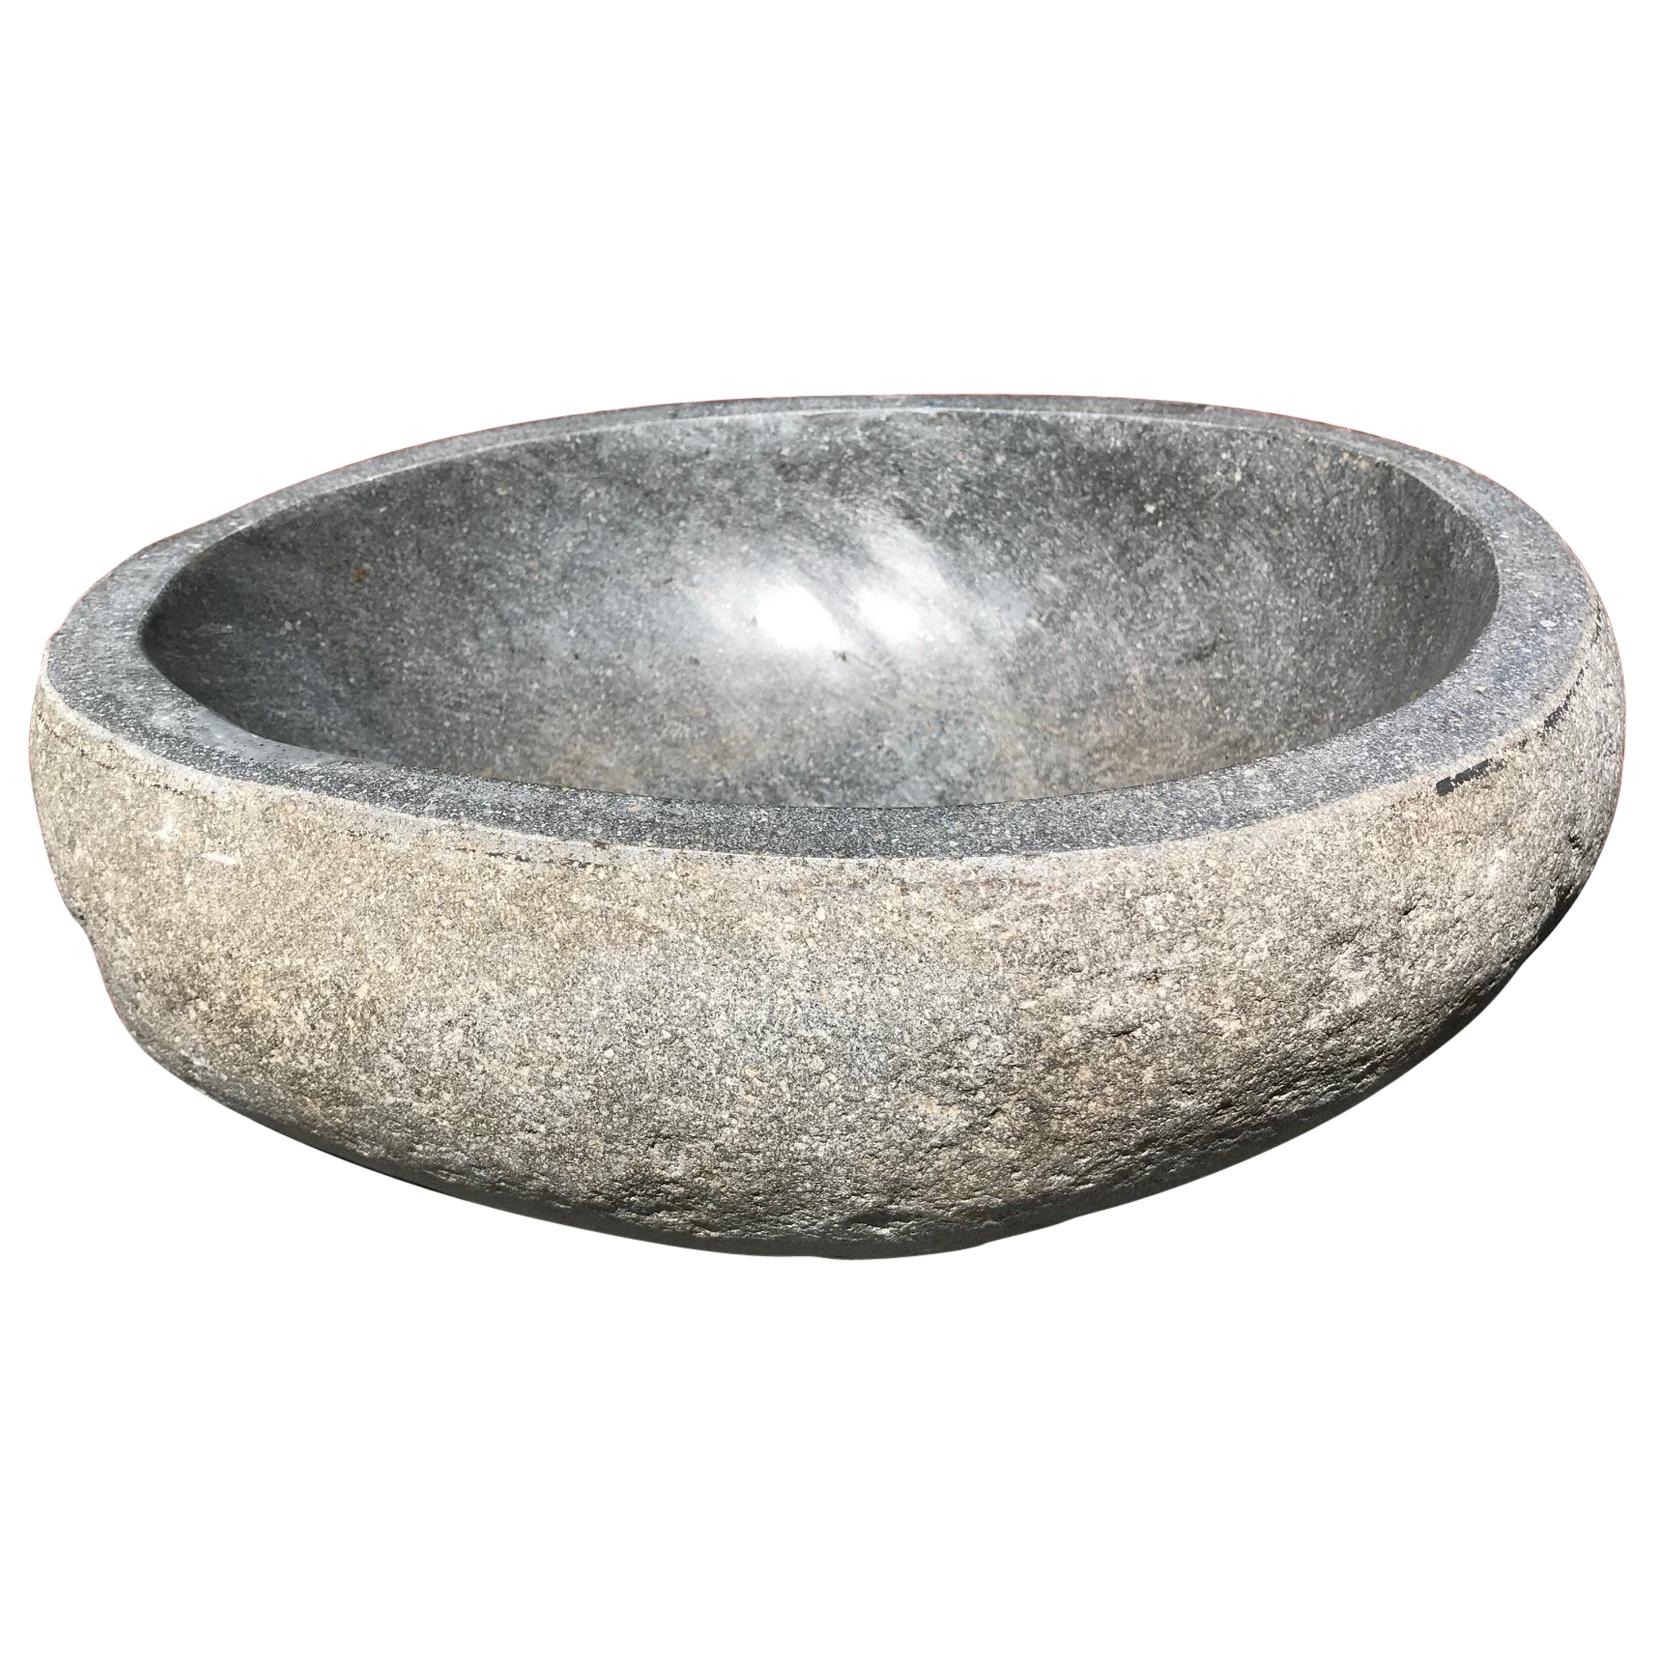 Great Organic Carved Natural Stone Bowl and Planter, Smooth to Touch